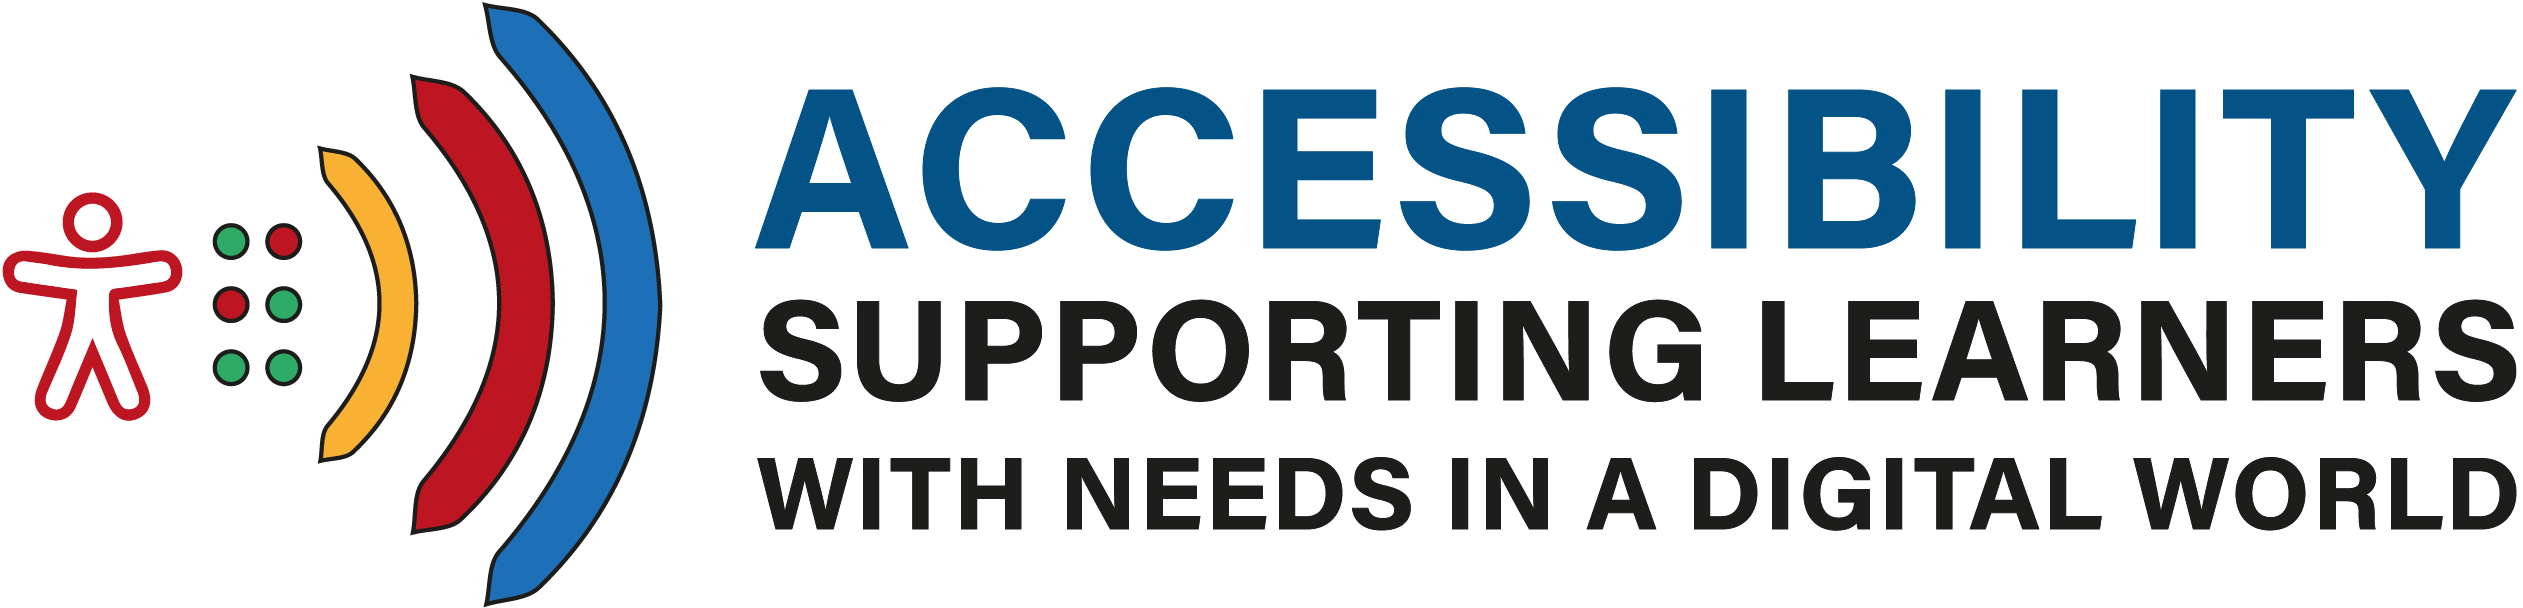 Achieving accessability Logo.png